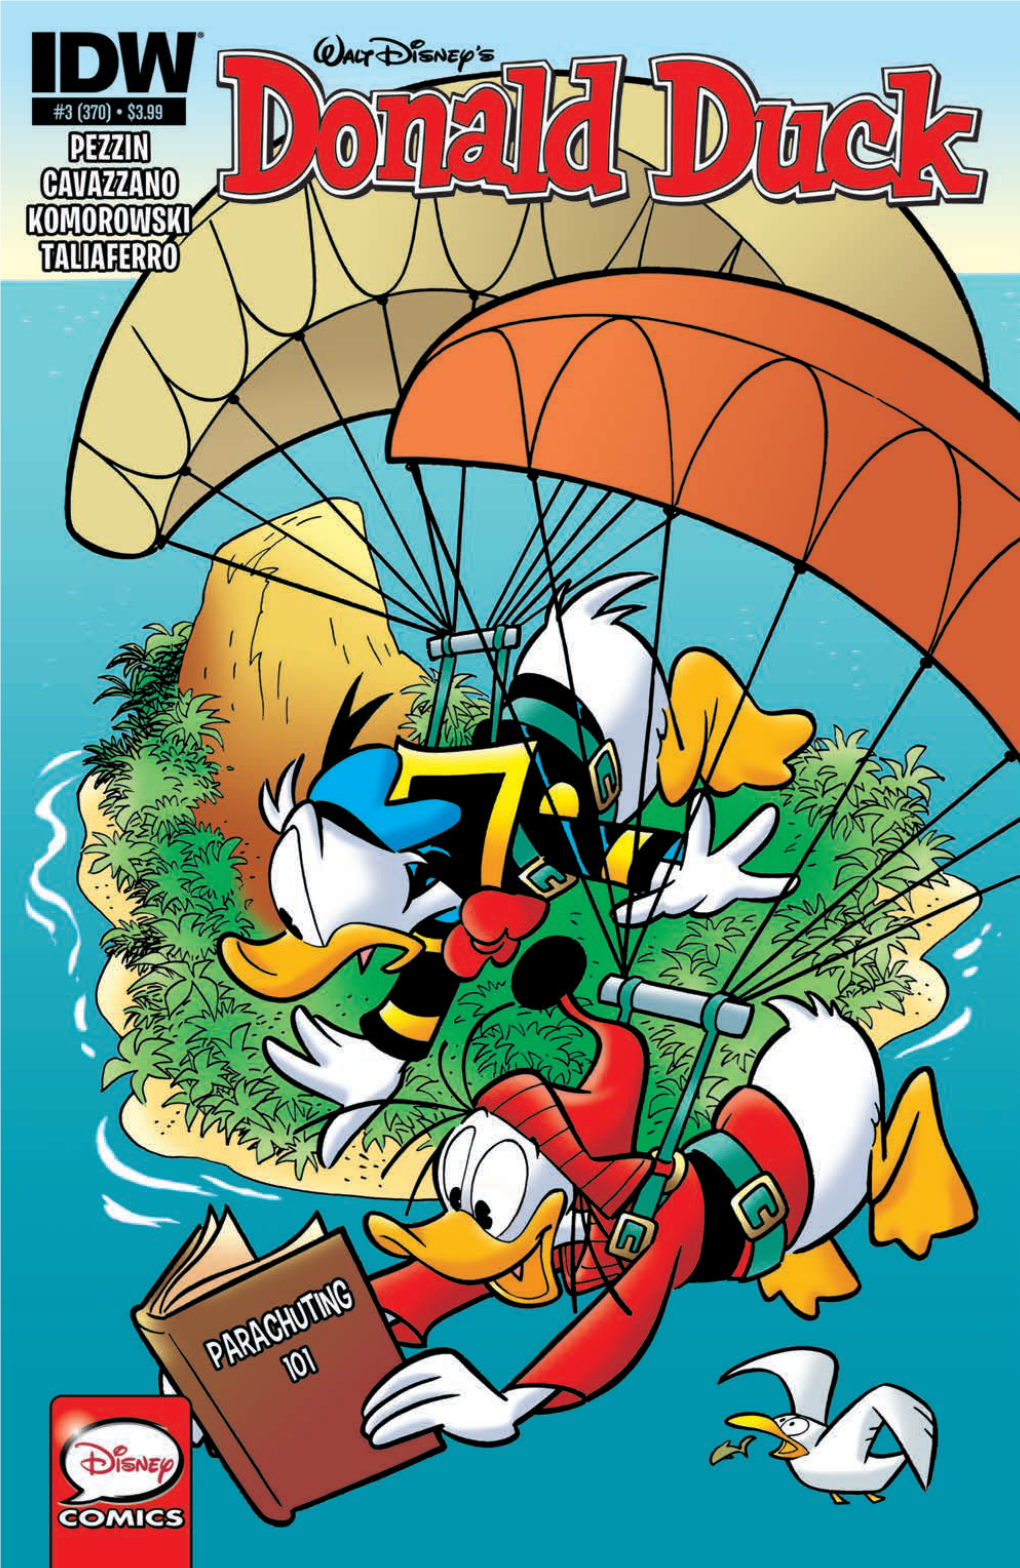 DONALD DUCK #3 (Legacy #370), JULY 2015